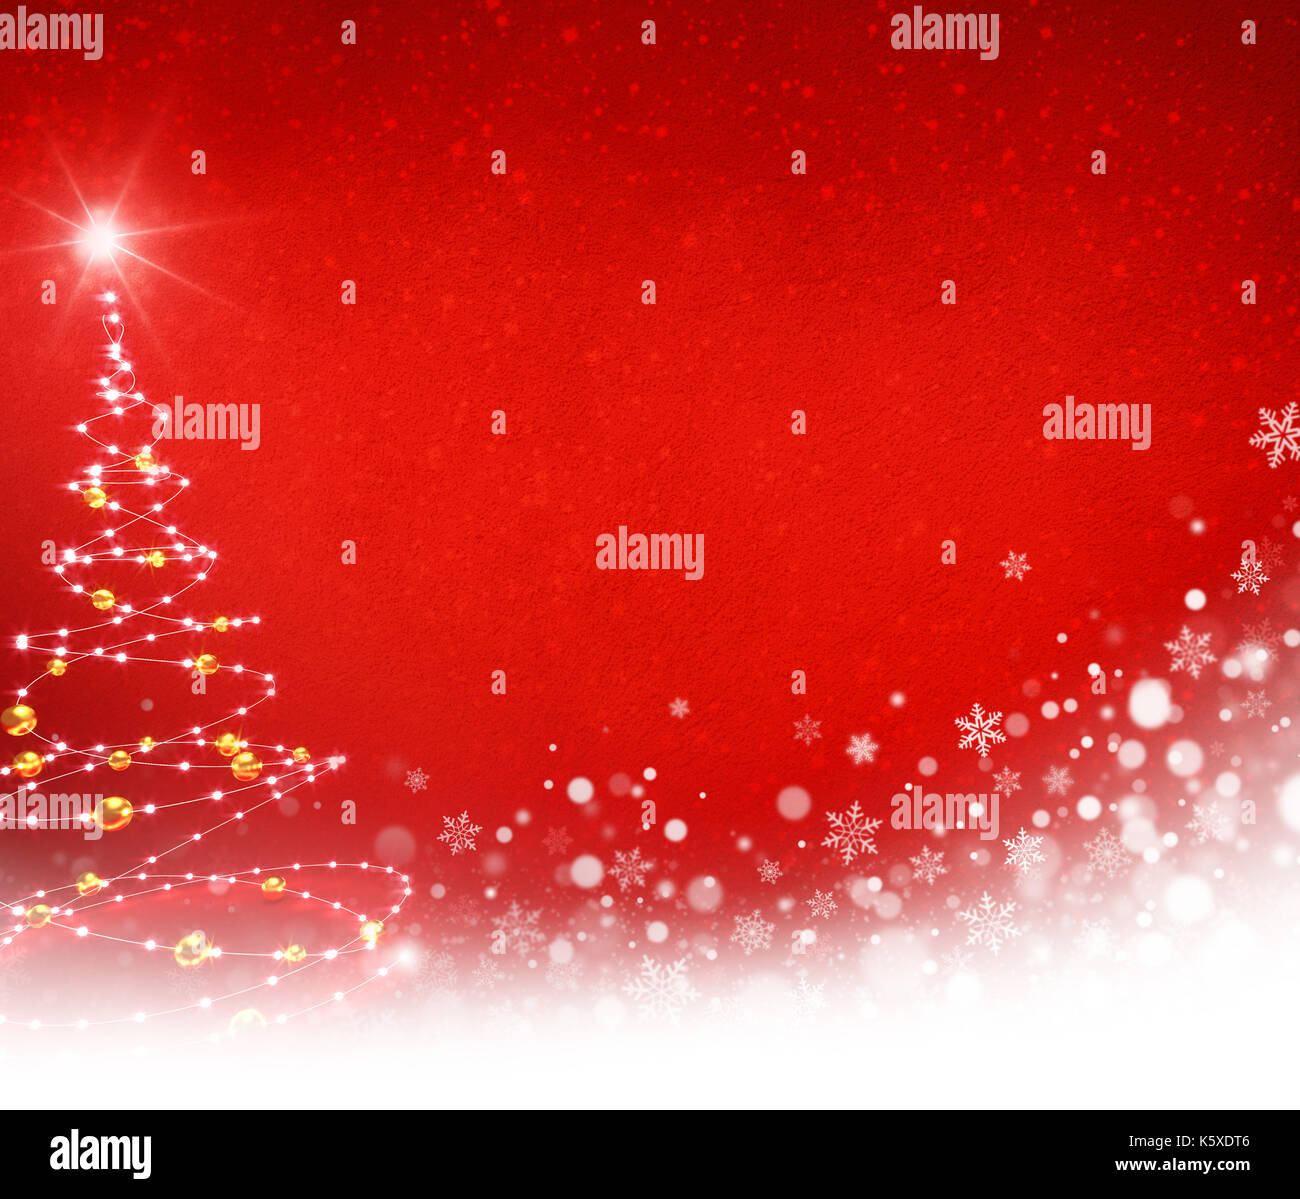 Christmas tree and white snowflakes on a festive red background - 3D illustration Stock Photo